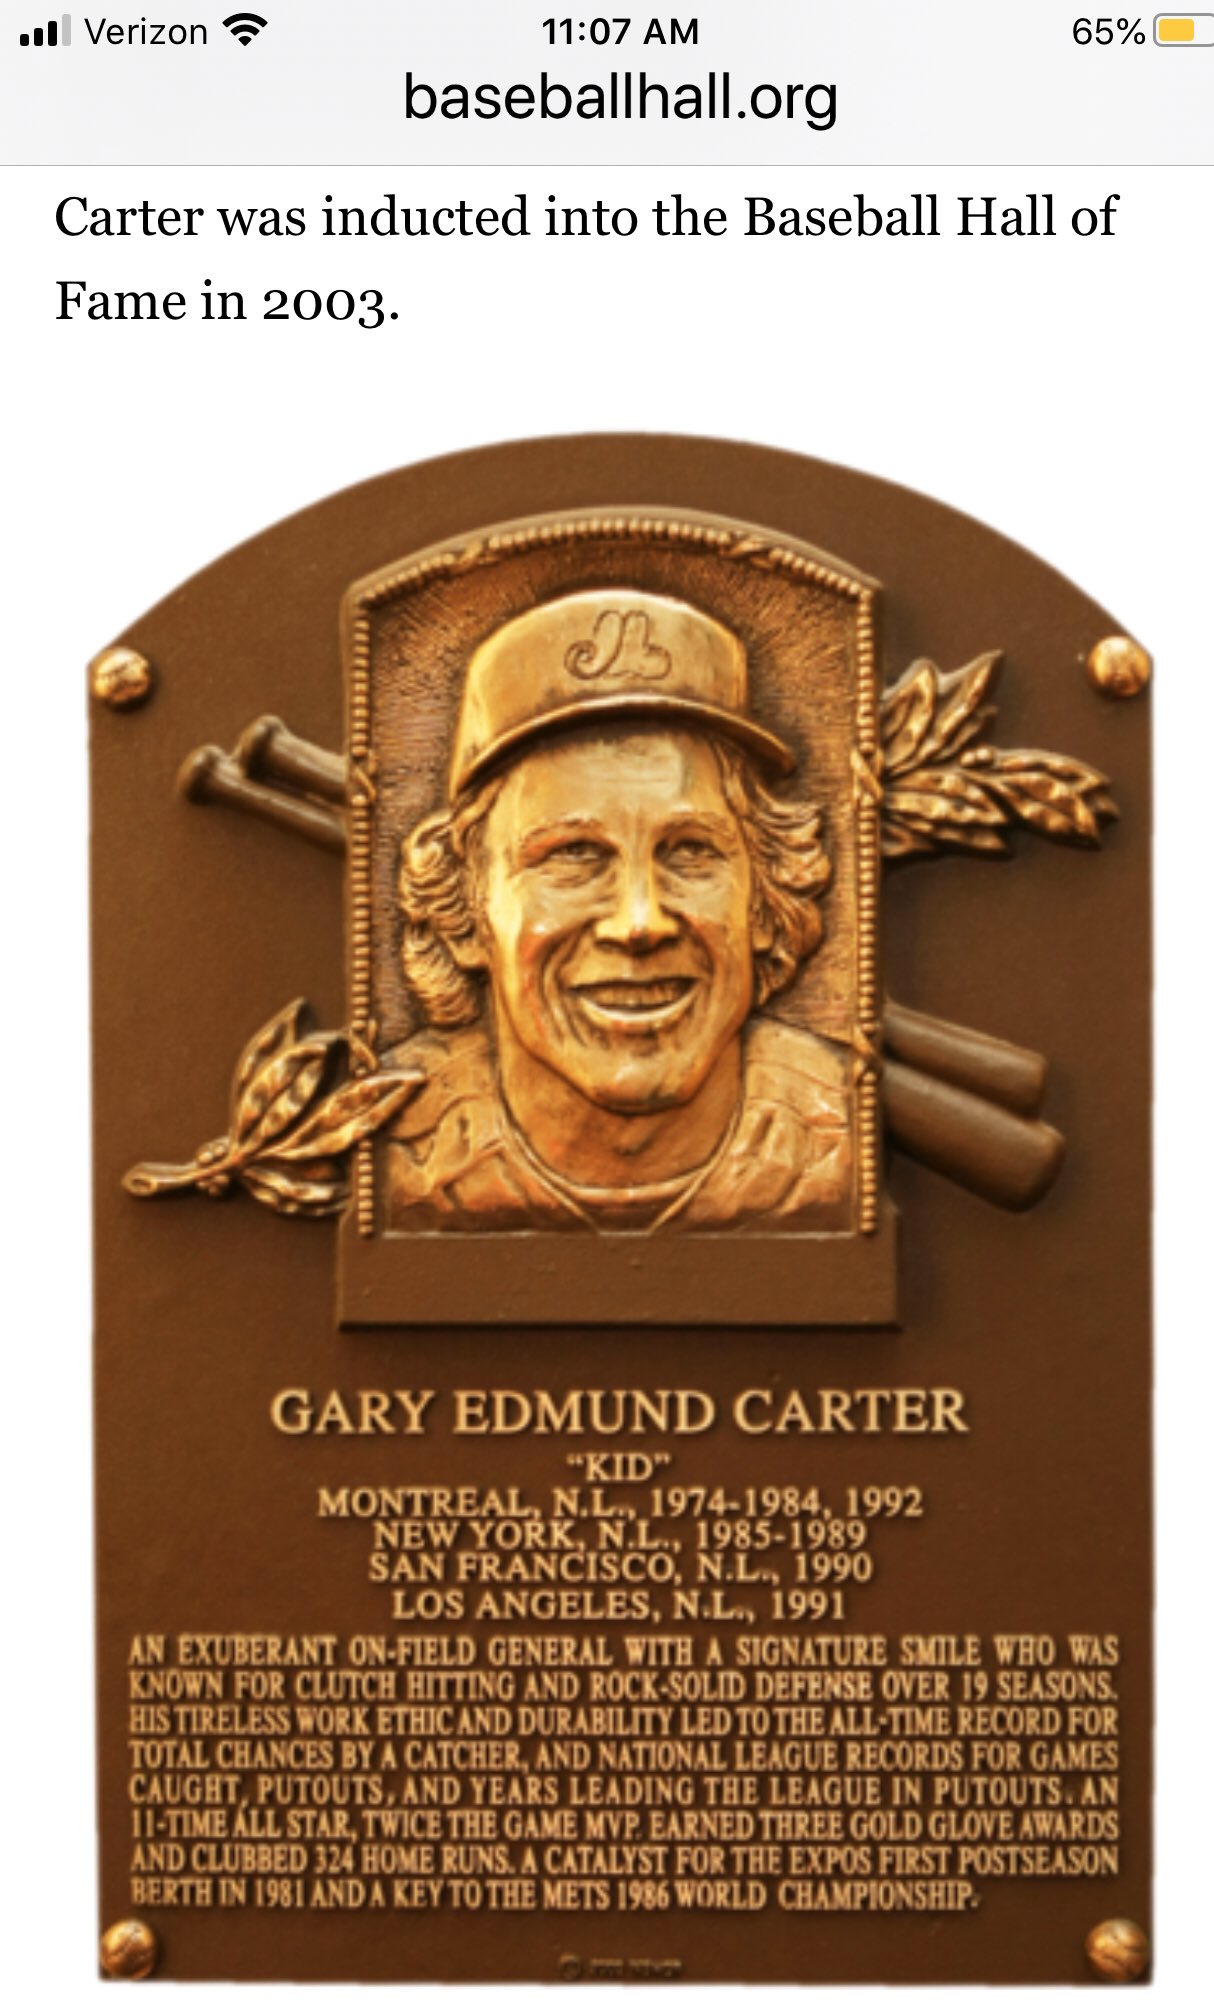 Happy birthday to my favorite player, the late, great HOF Gary Carter.  